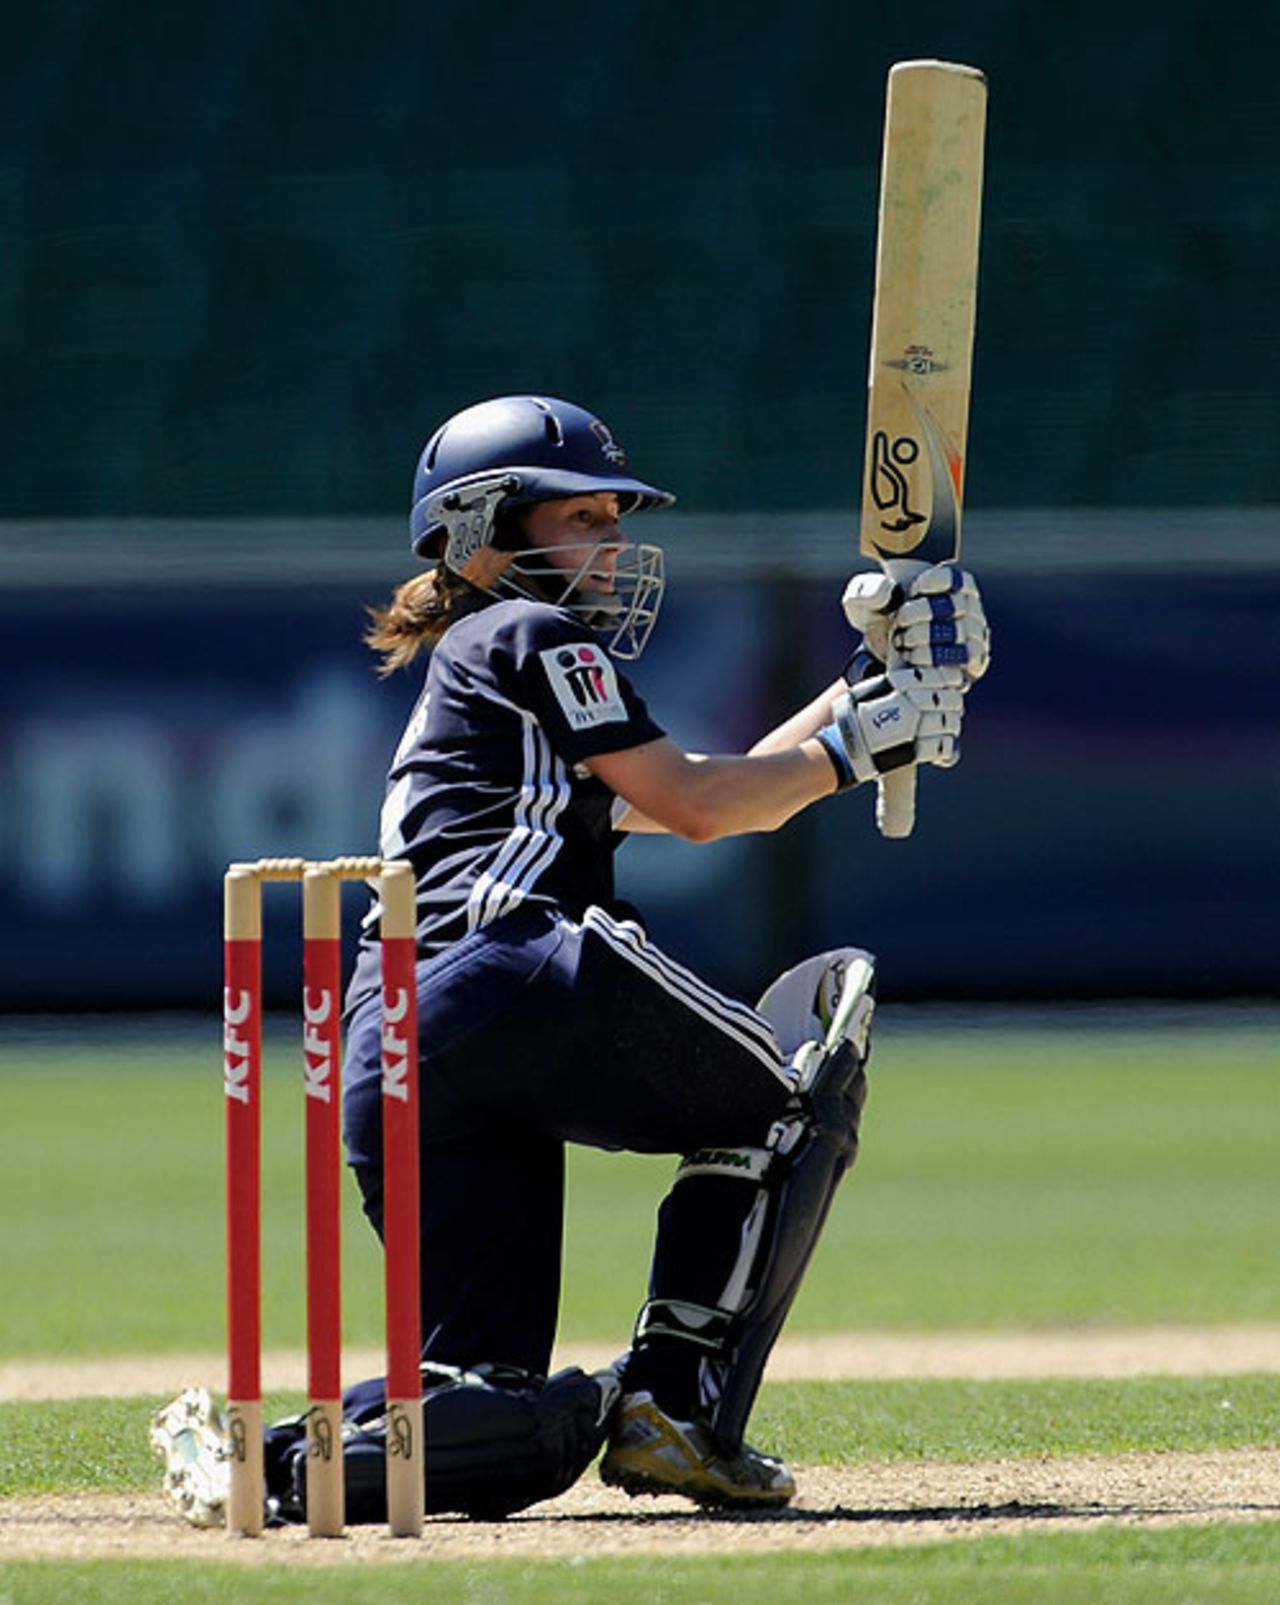 Meg Lanning plays a shot during the Women's Twenty20 match between the Victoria Women and Western Australia Women held at the Melbourne Cricket Ground, January 8, 2009